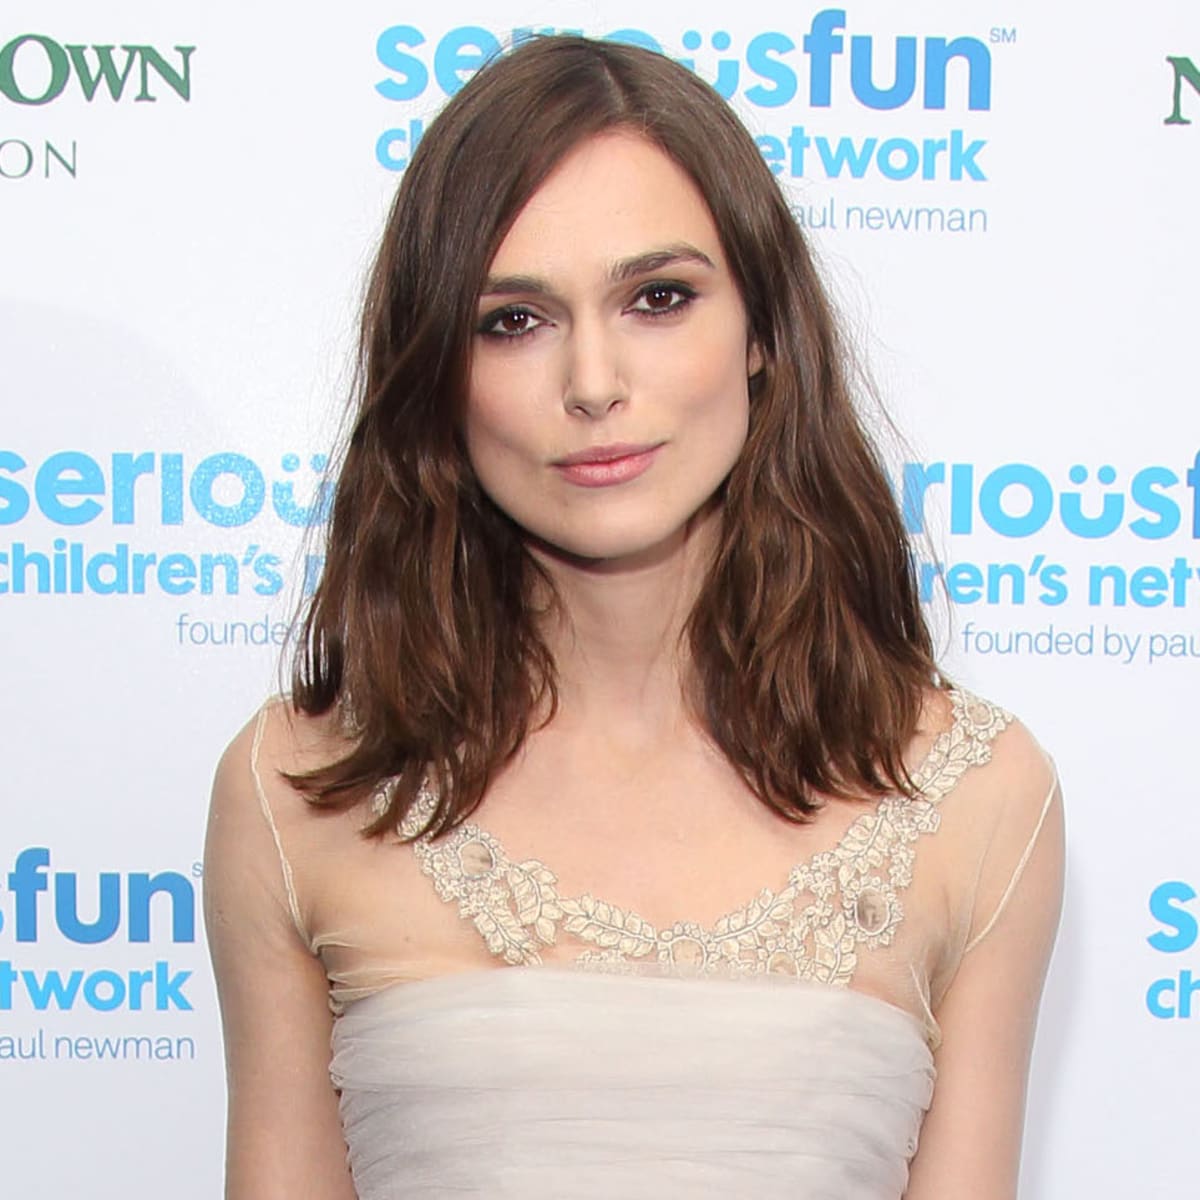 Keira Knightley Ruined Her Chanel Wedding Dress with Big Red Wine Stain  Photo 3073895  Keira Knightley Photos  Just Jared Entertainment News